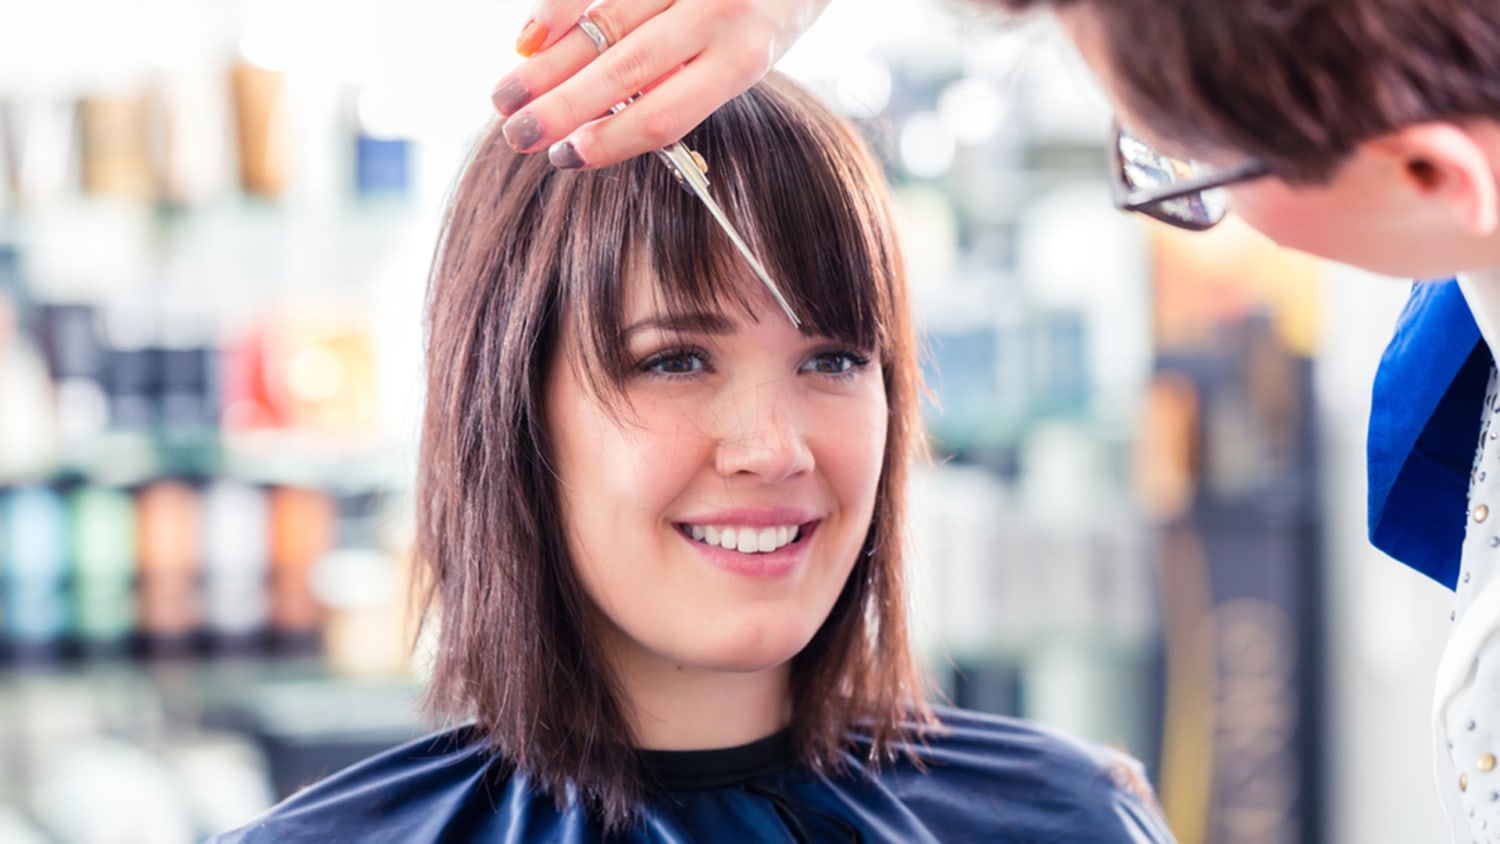 How to Cut Your Own Hair at Home When You Can't Go to a Salon